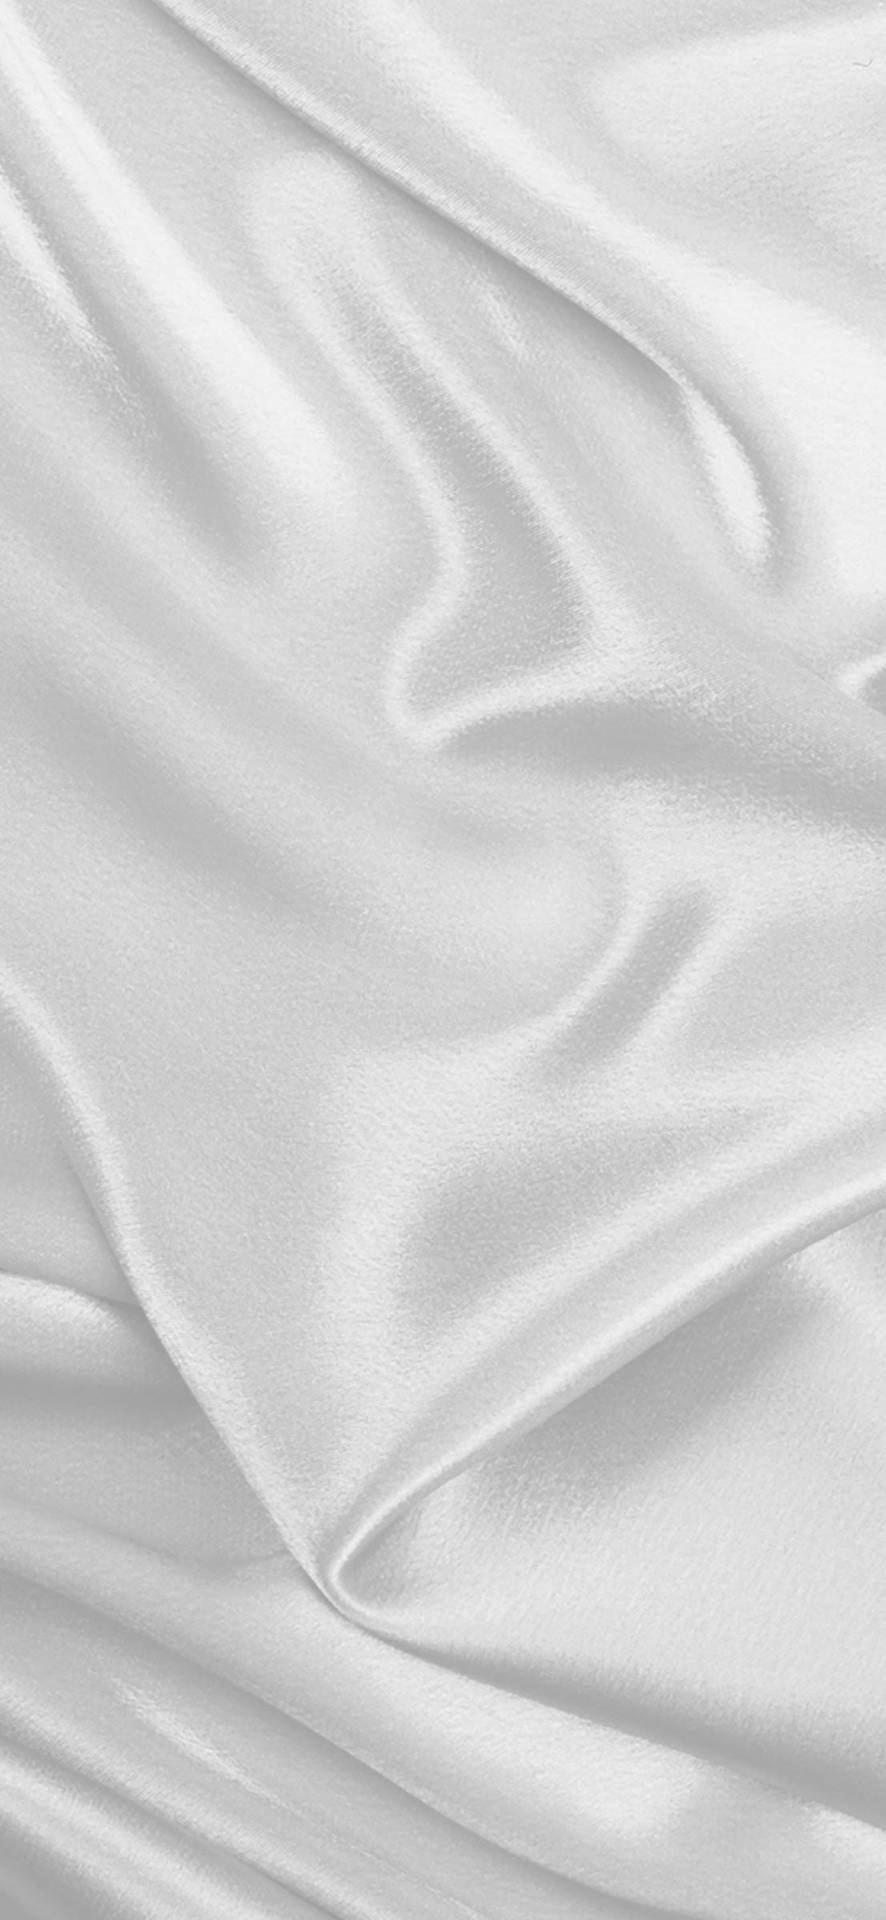 White Silky Fabric Iphone Wallpaper